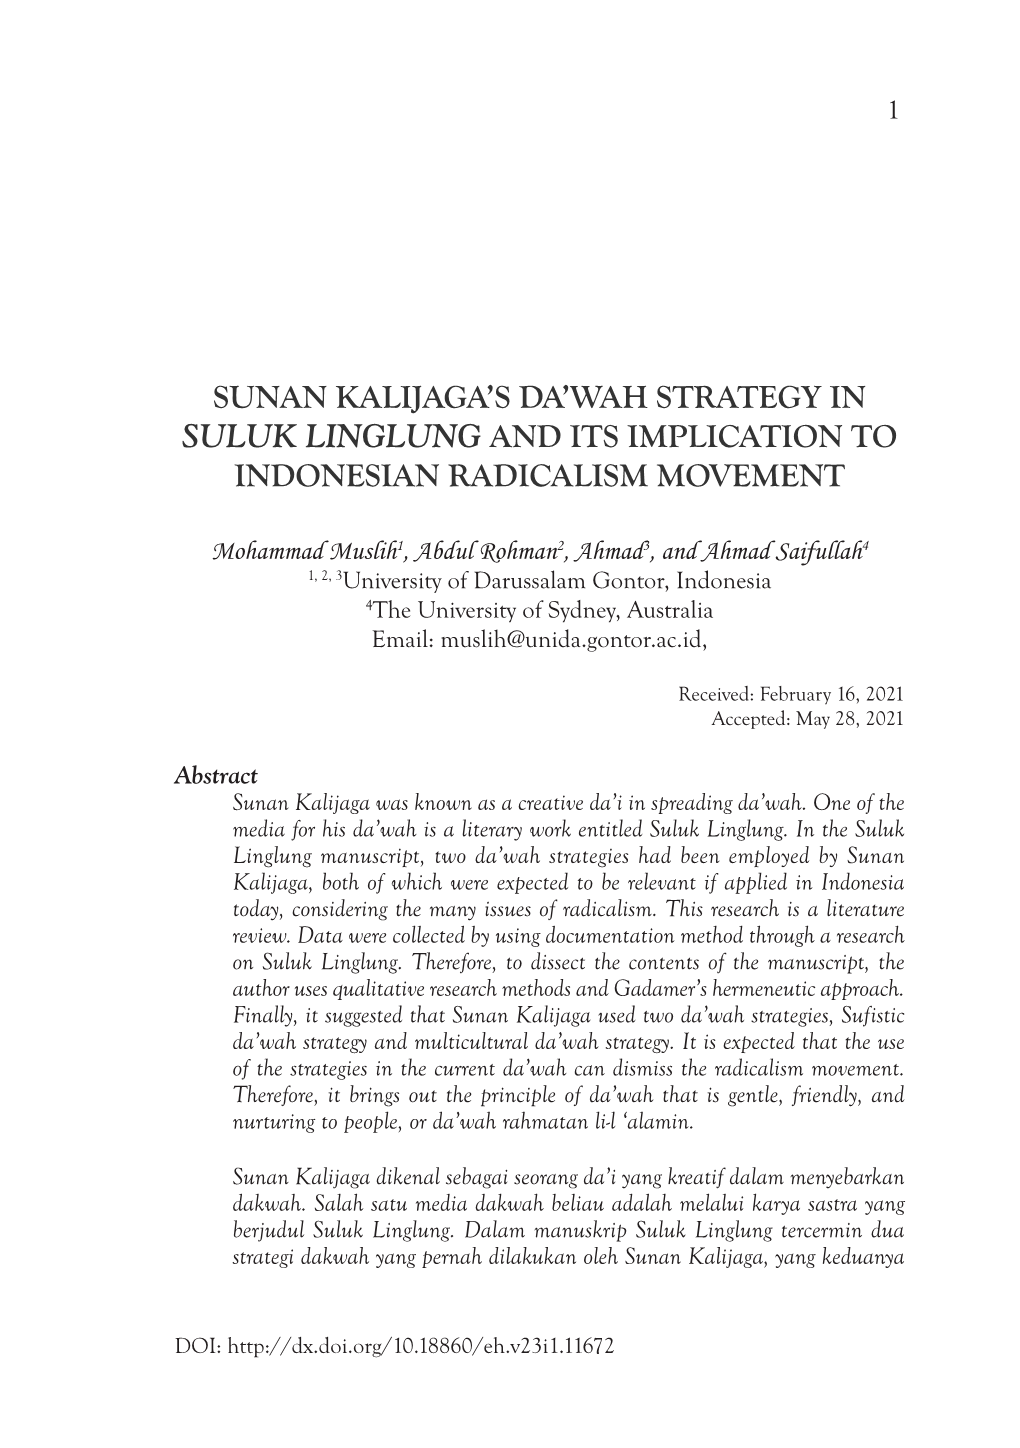 Sunan Kalijaga's Da'wah Strategy in Suluk Linglung and Its Implication To